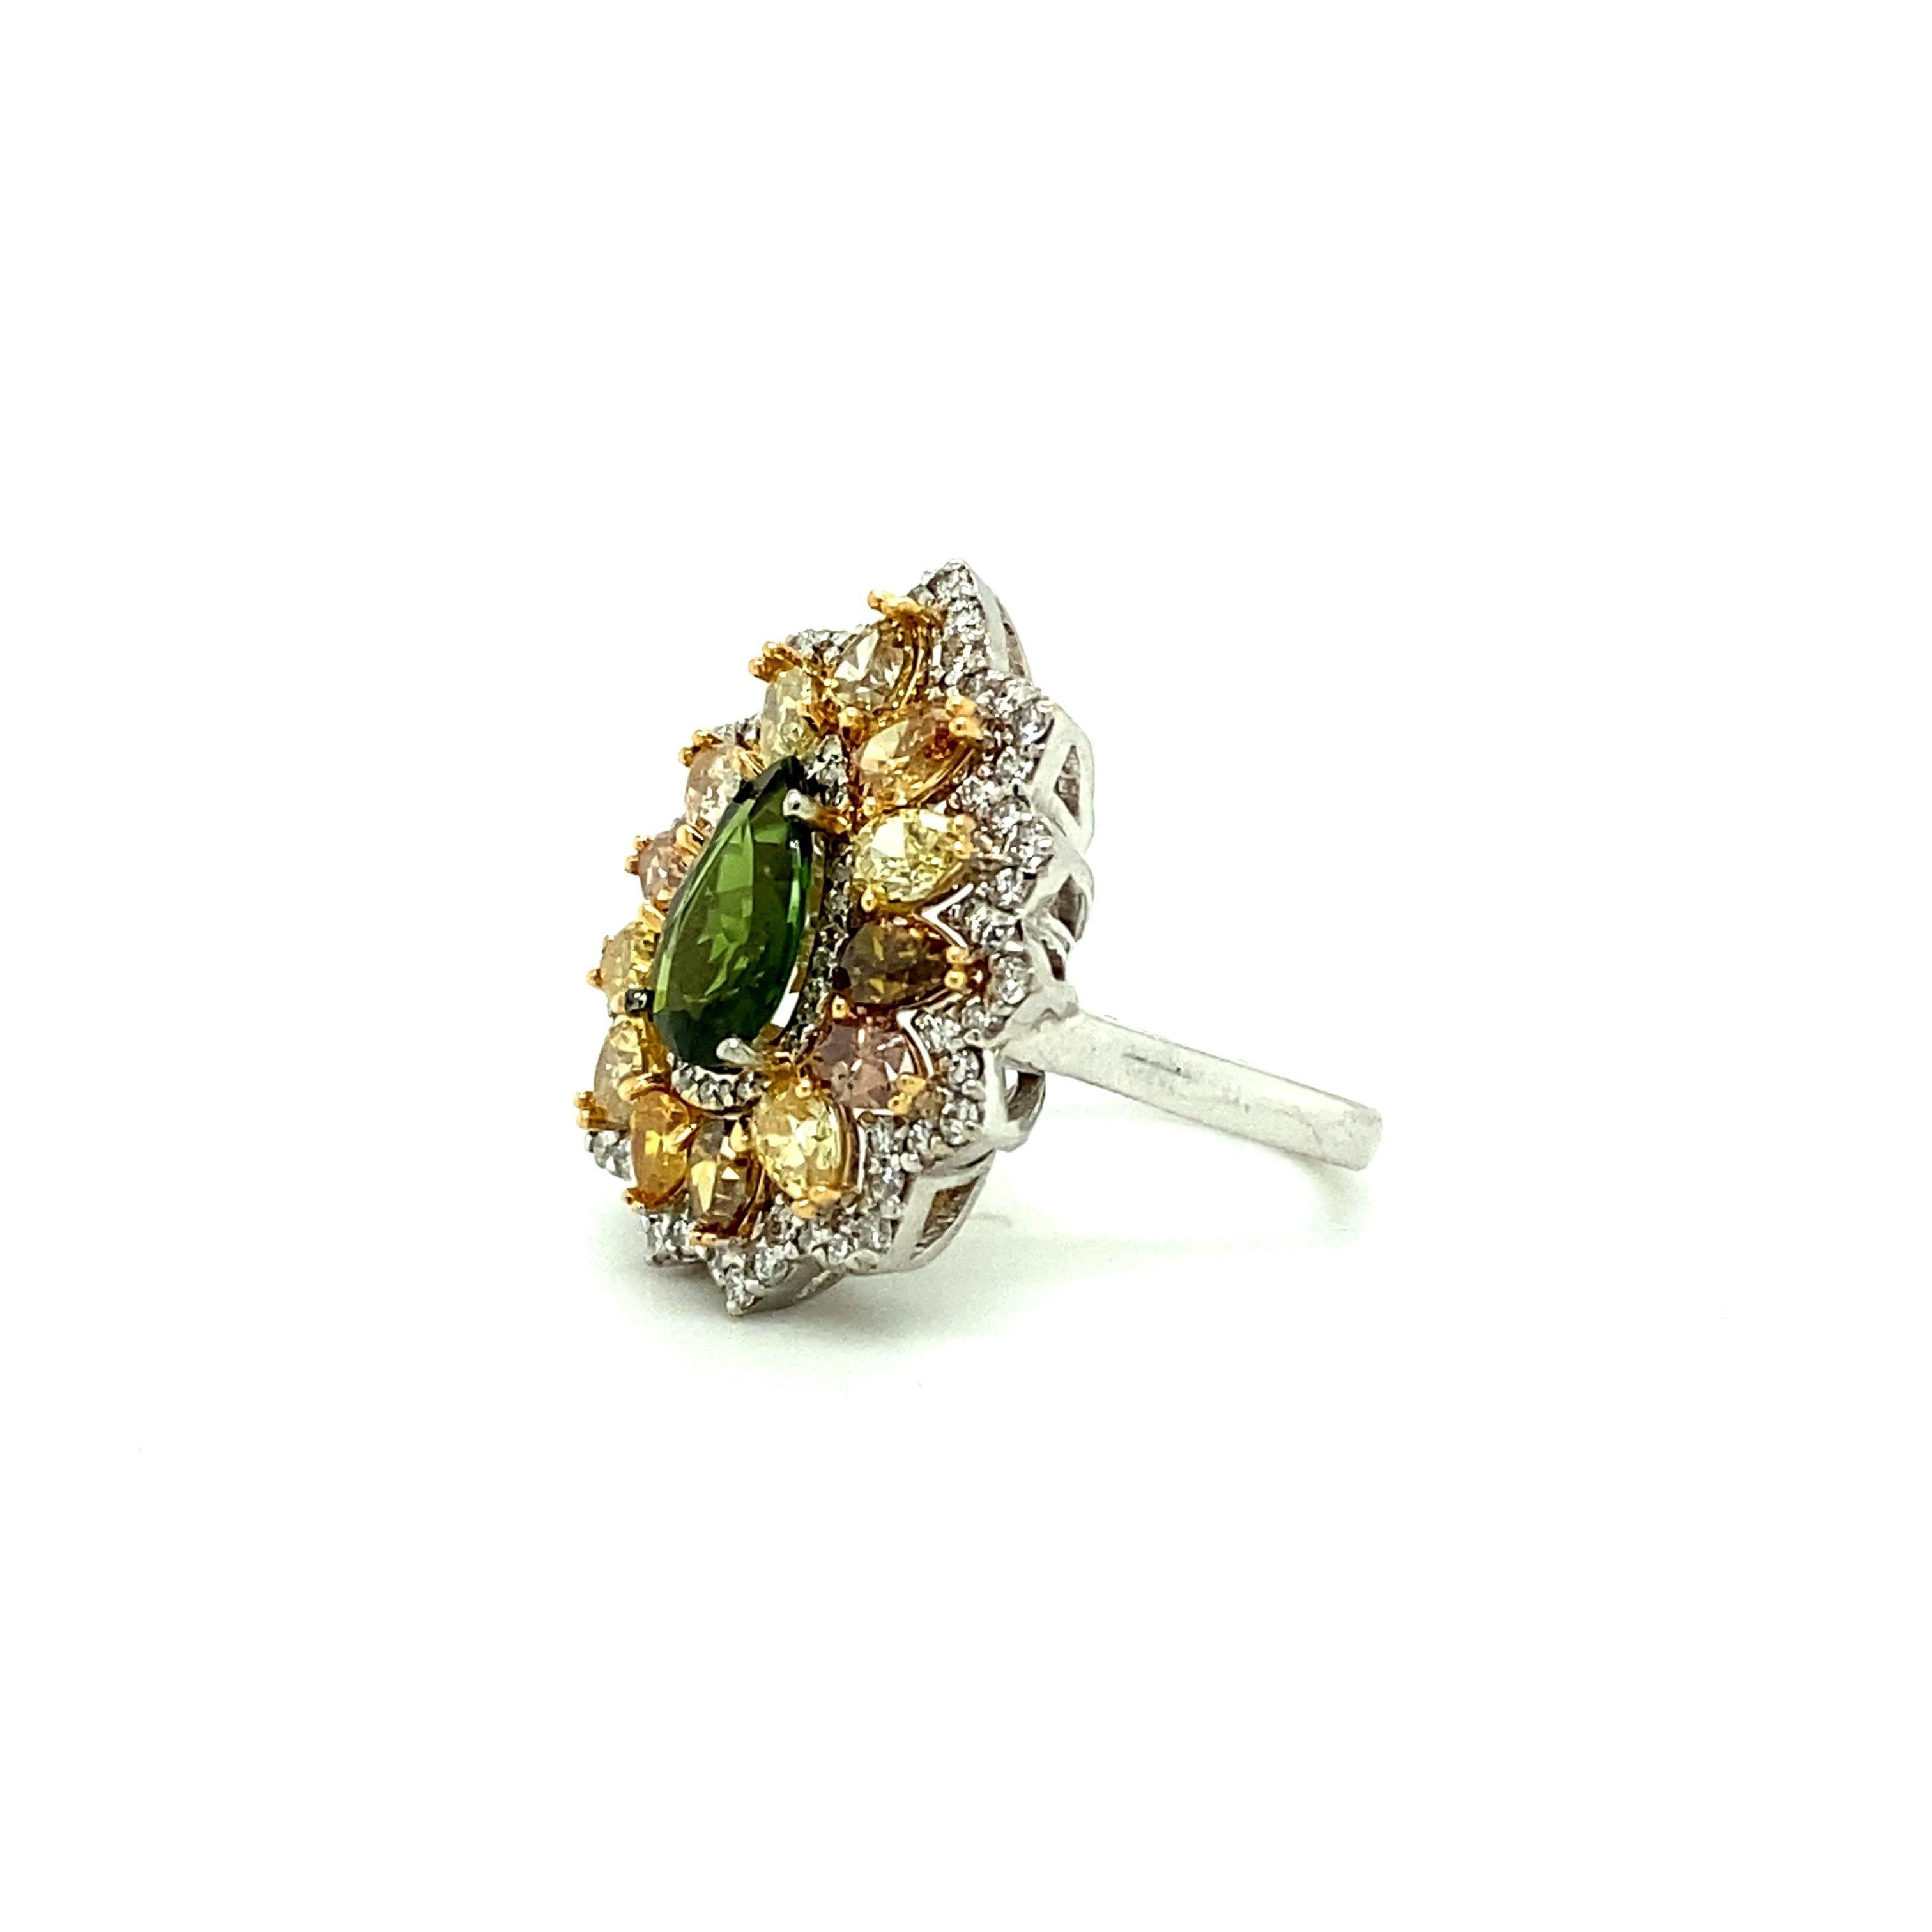 Pear Cut 6.60 Ct Green Tourmaline & Multi-Color Diamond Ring in 18kt White Gold